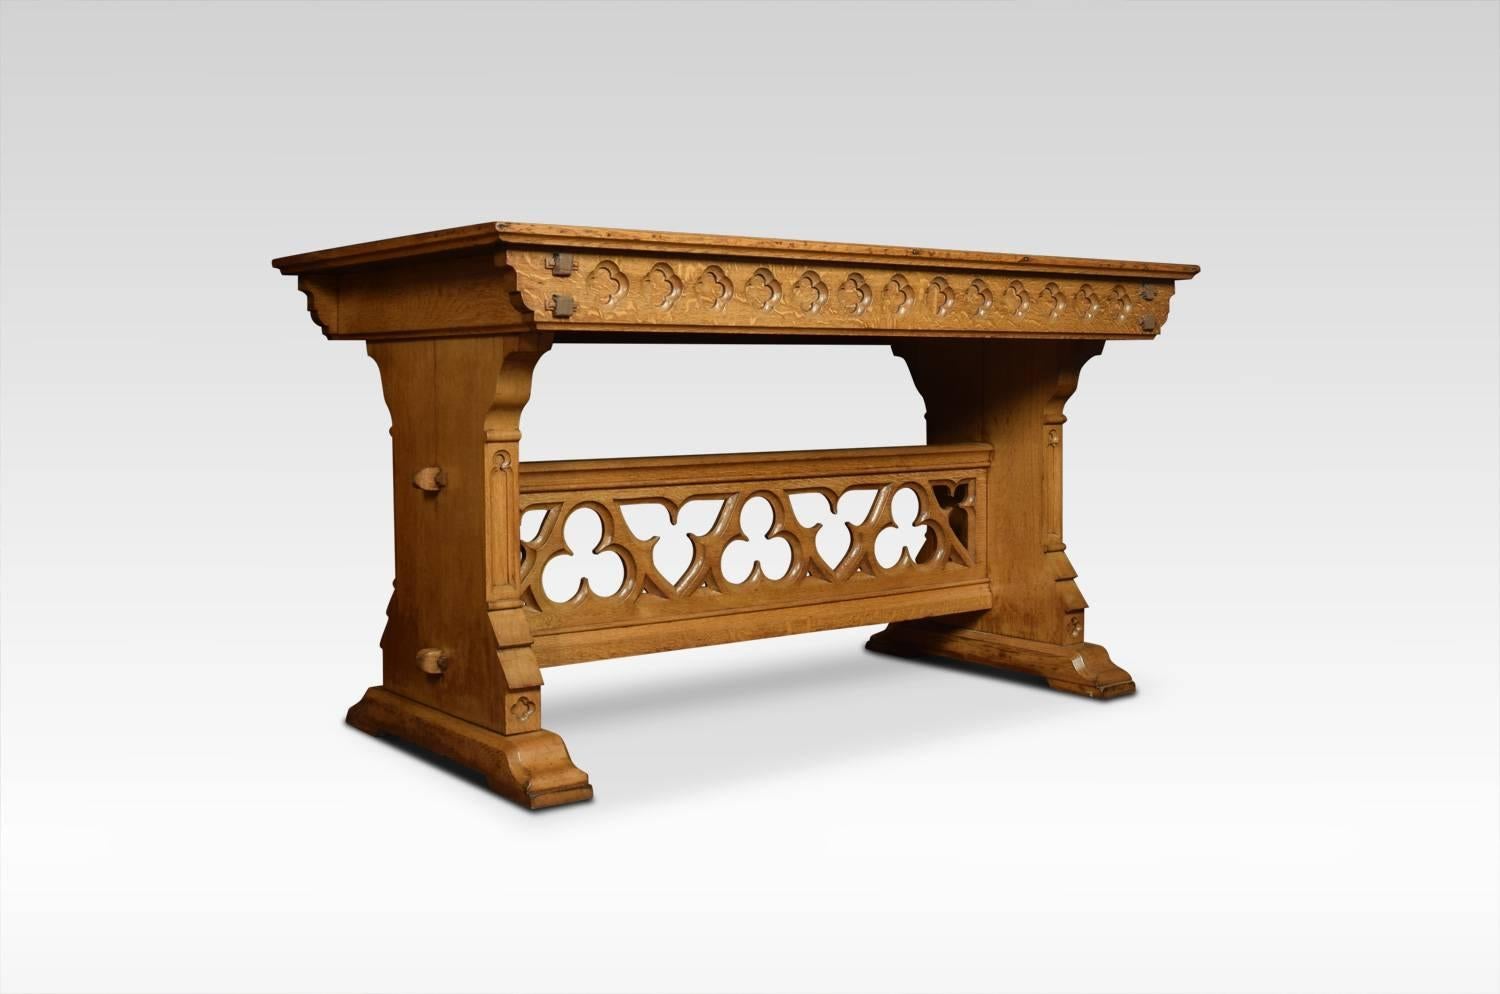 Substantial oak alter / hall table, of architectural form with very large rectangular top, above pierced Gothic freeze raised on trestle legs united by carved trefoil stretcher.
Dimensions:
Height 36 inches
Length 66 inches
Width 36 inches.